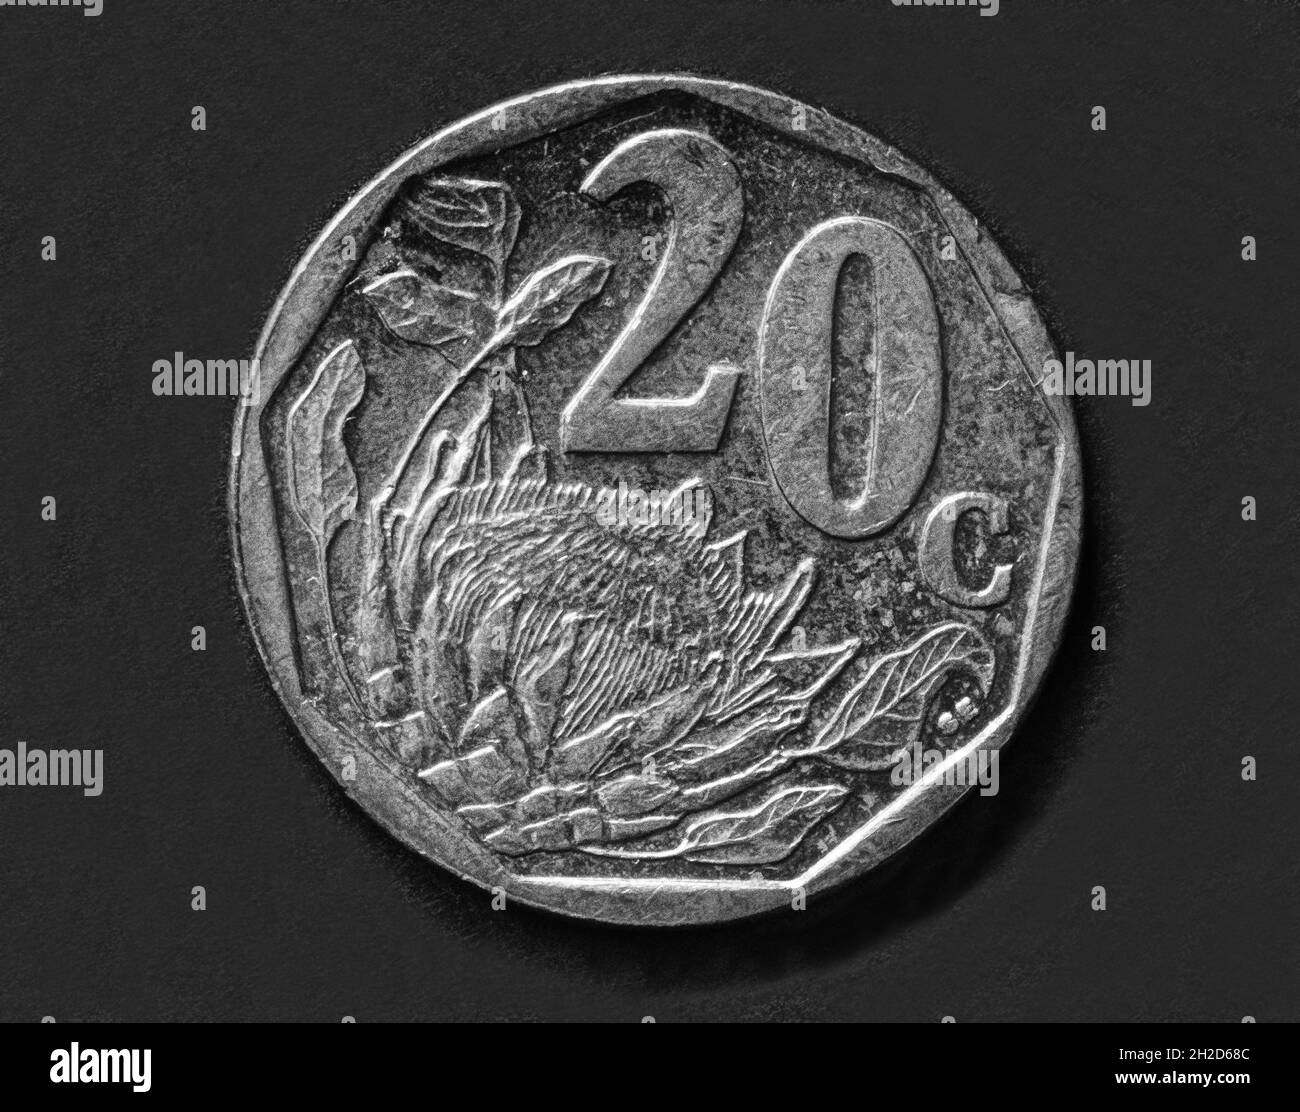 African Coins Black And White Stock Photos Images Alamy